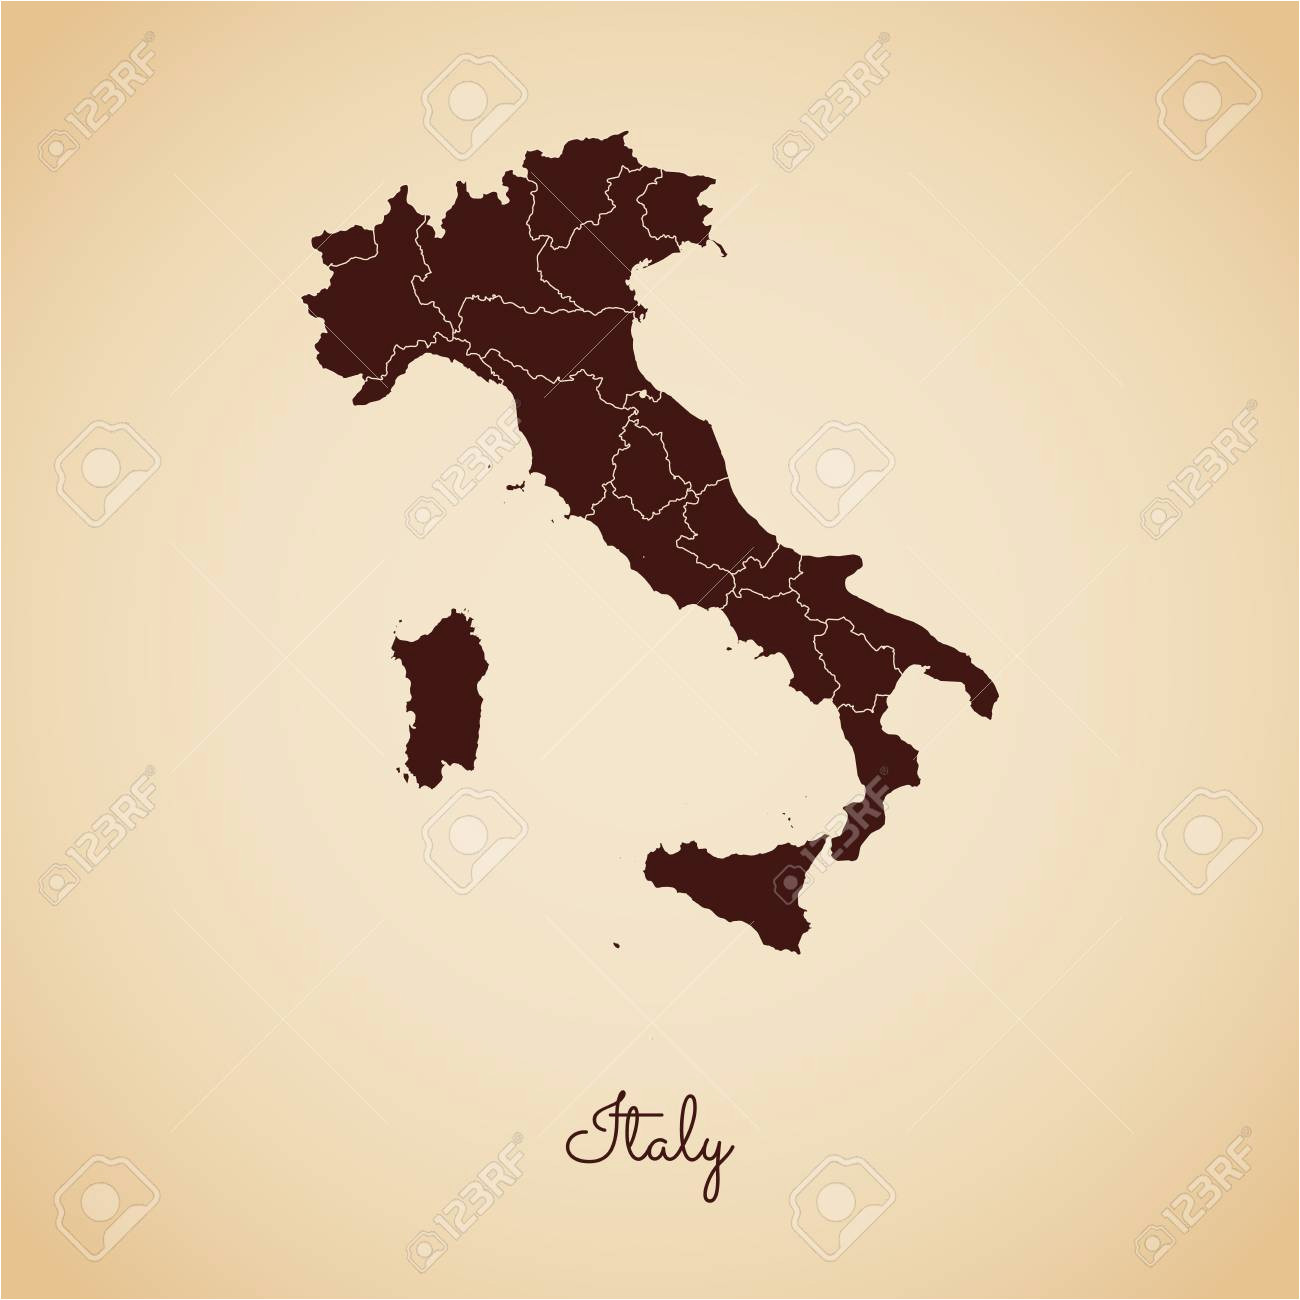 italy region map retro style brown outline on old paper background